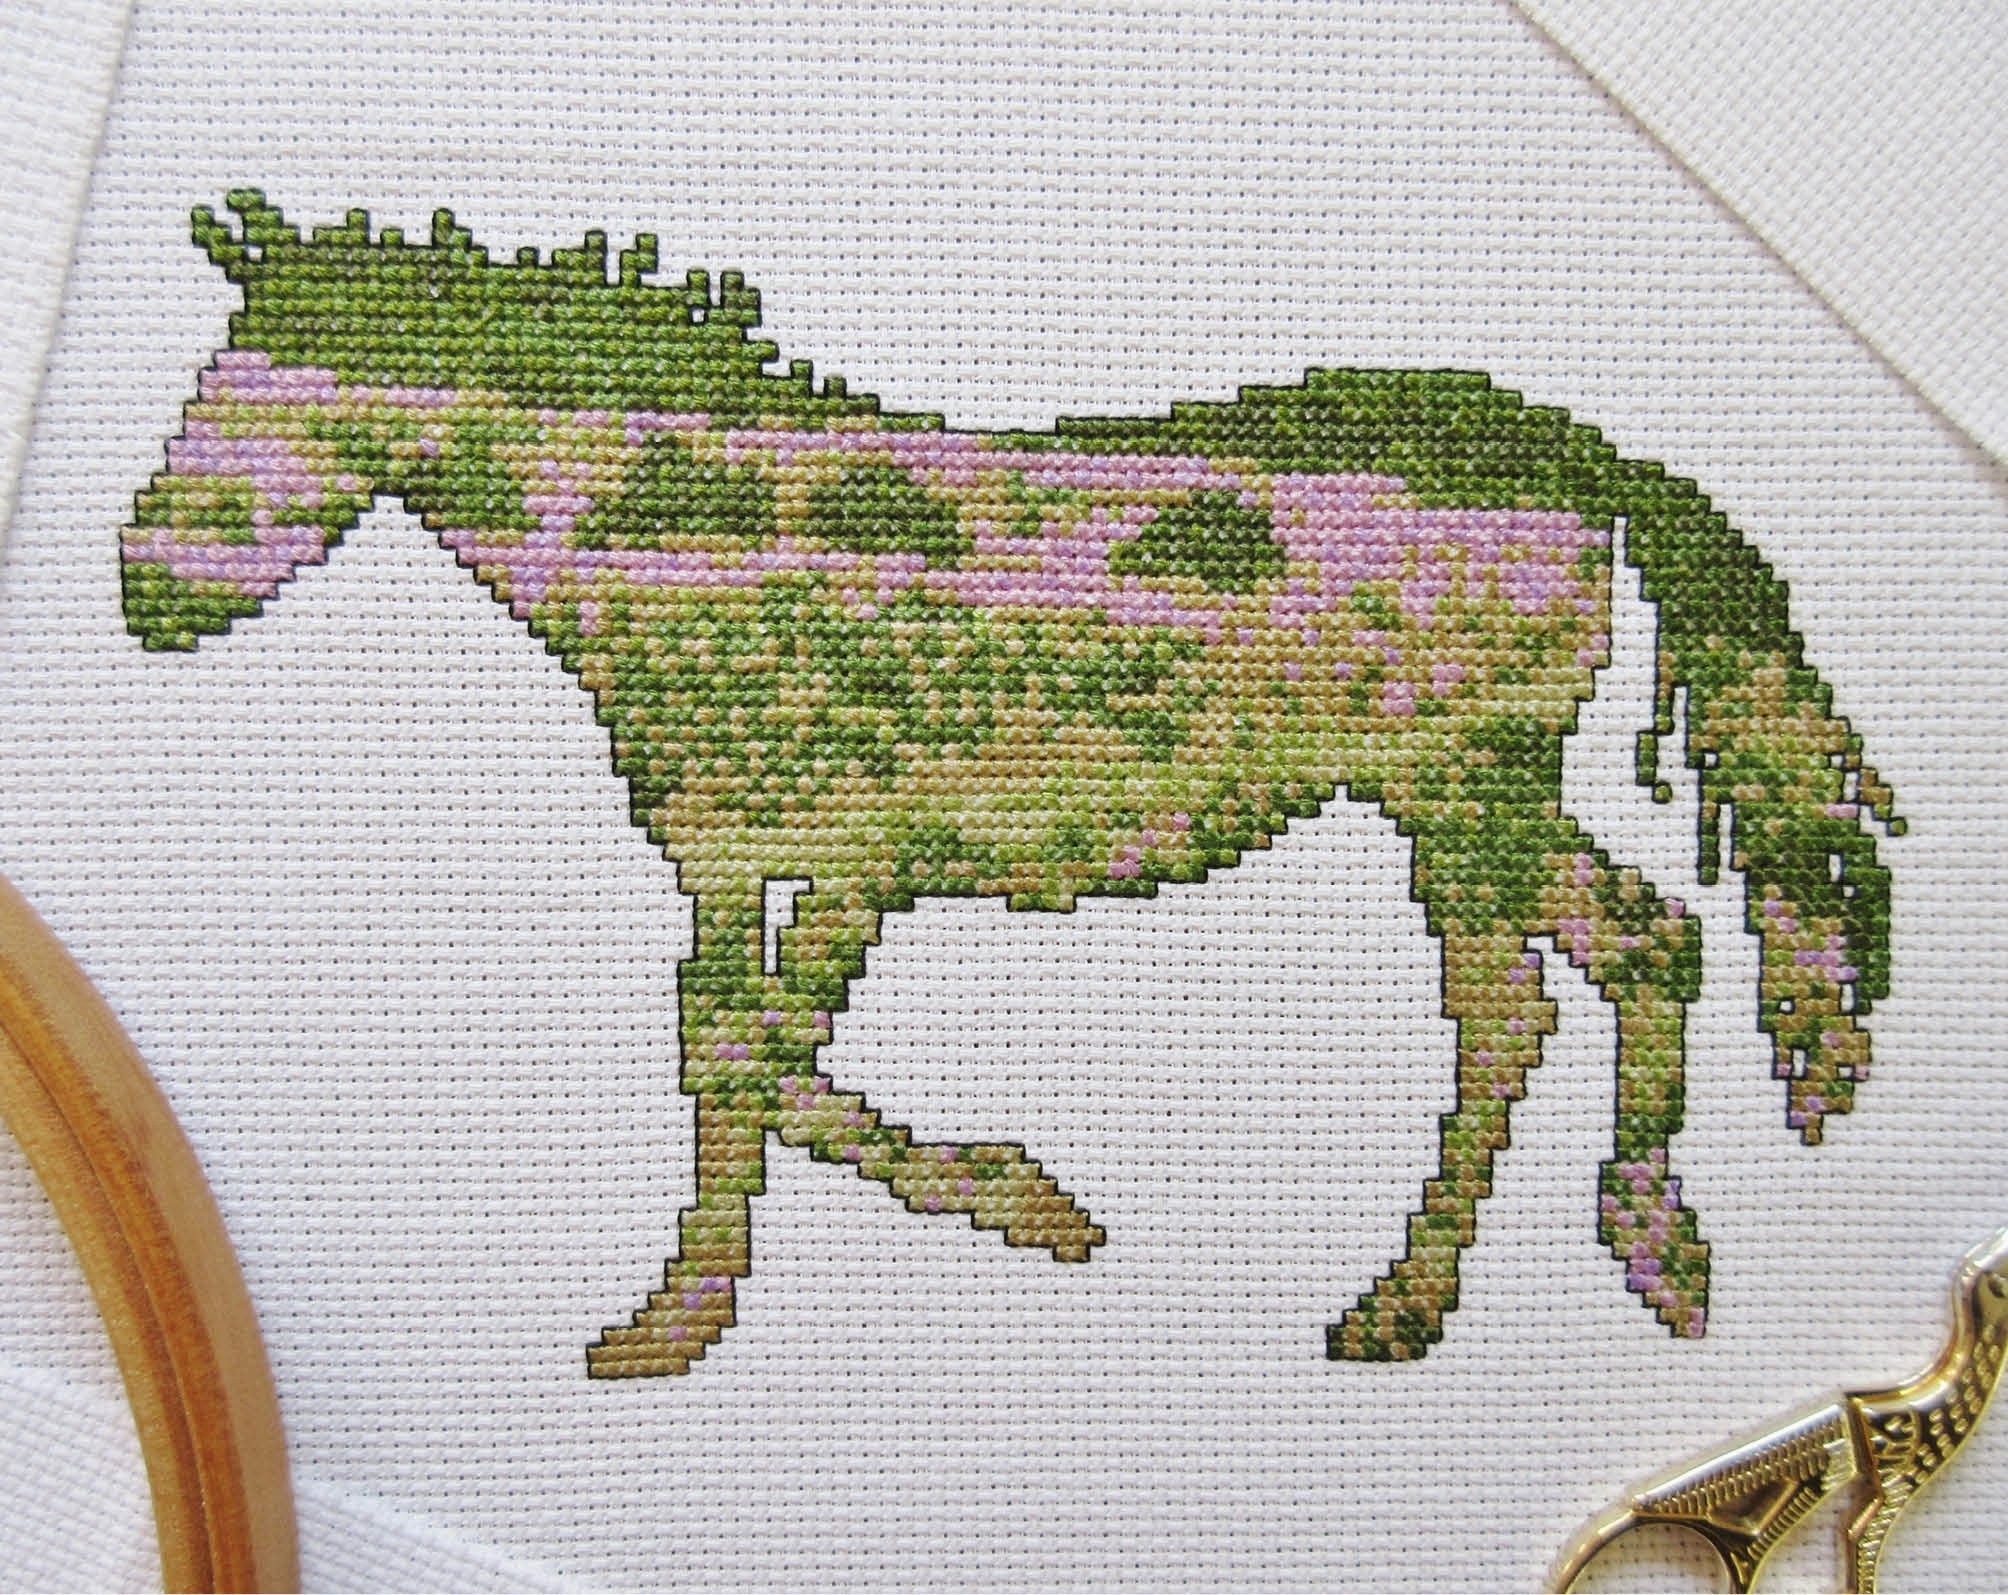 Cross stitch pattern of the silhouette of a pony with a view of the New Forest in southern England inside it. Stitched piece with hoop and sewing scissors.